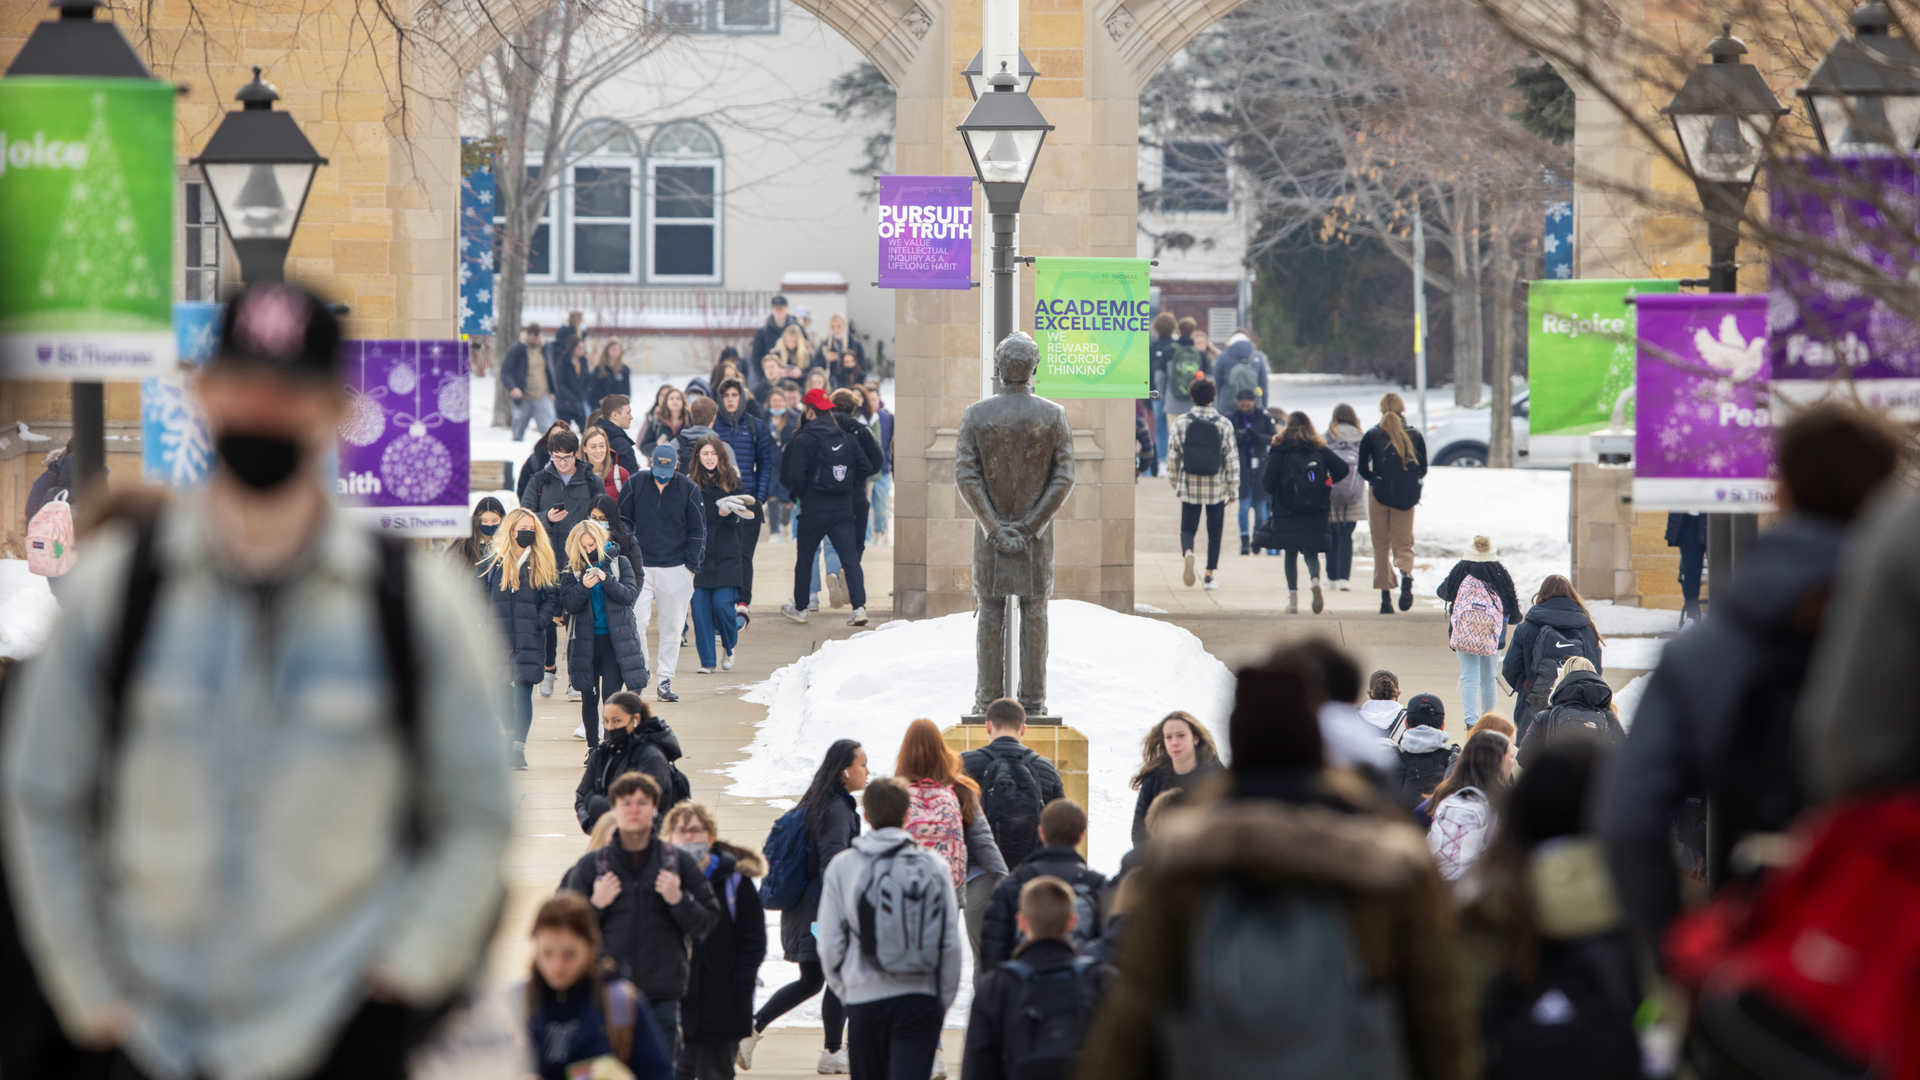 students walking through the center of the quad with John Ireland, the Arches and “Pursuit of Truth” and “Academic Excellence” flags prominently displayed